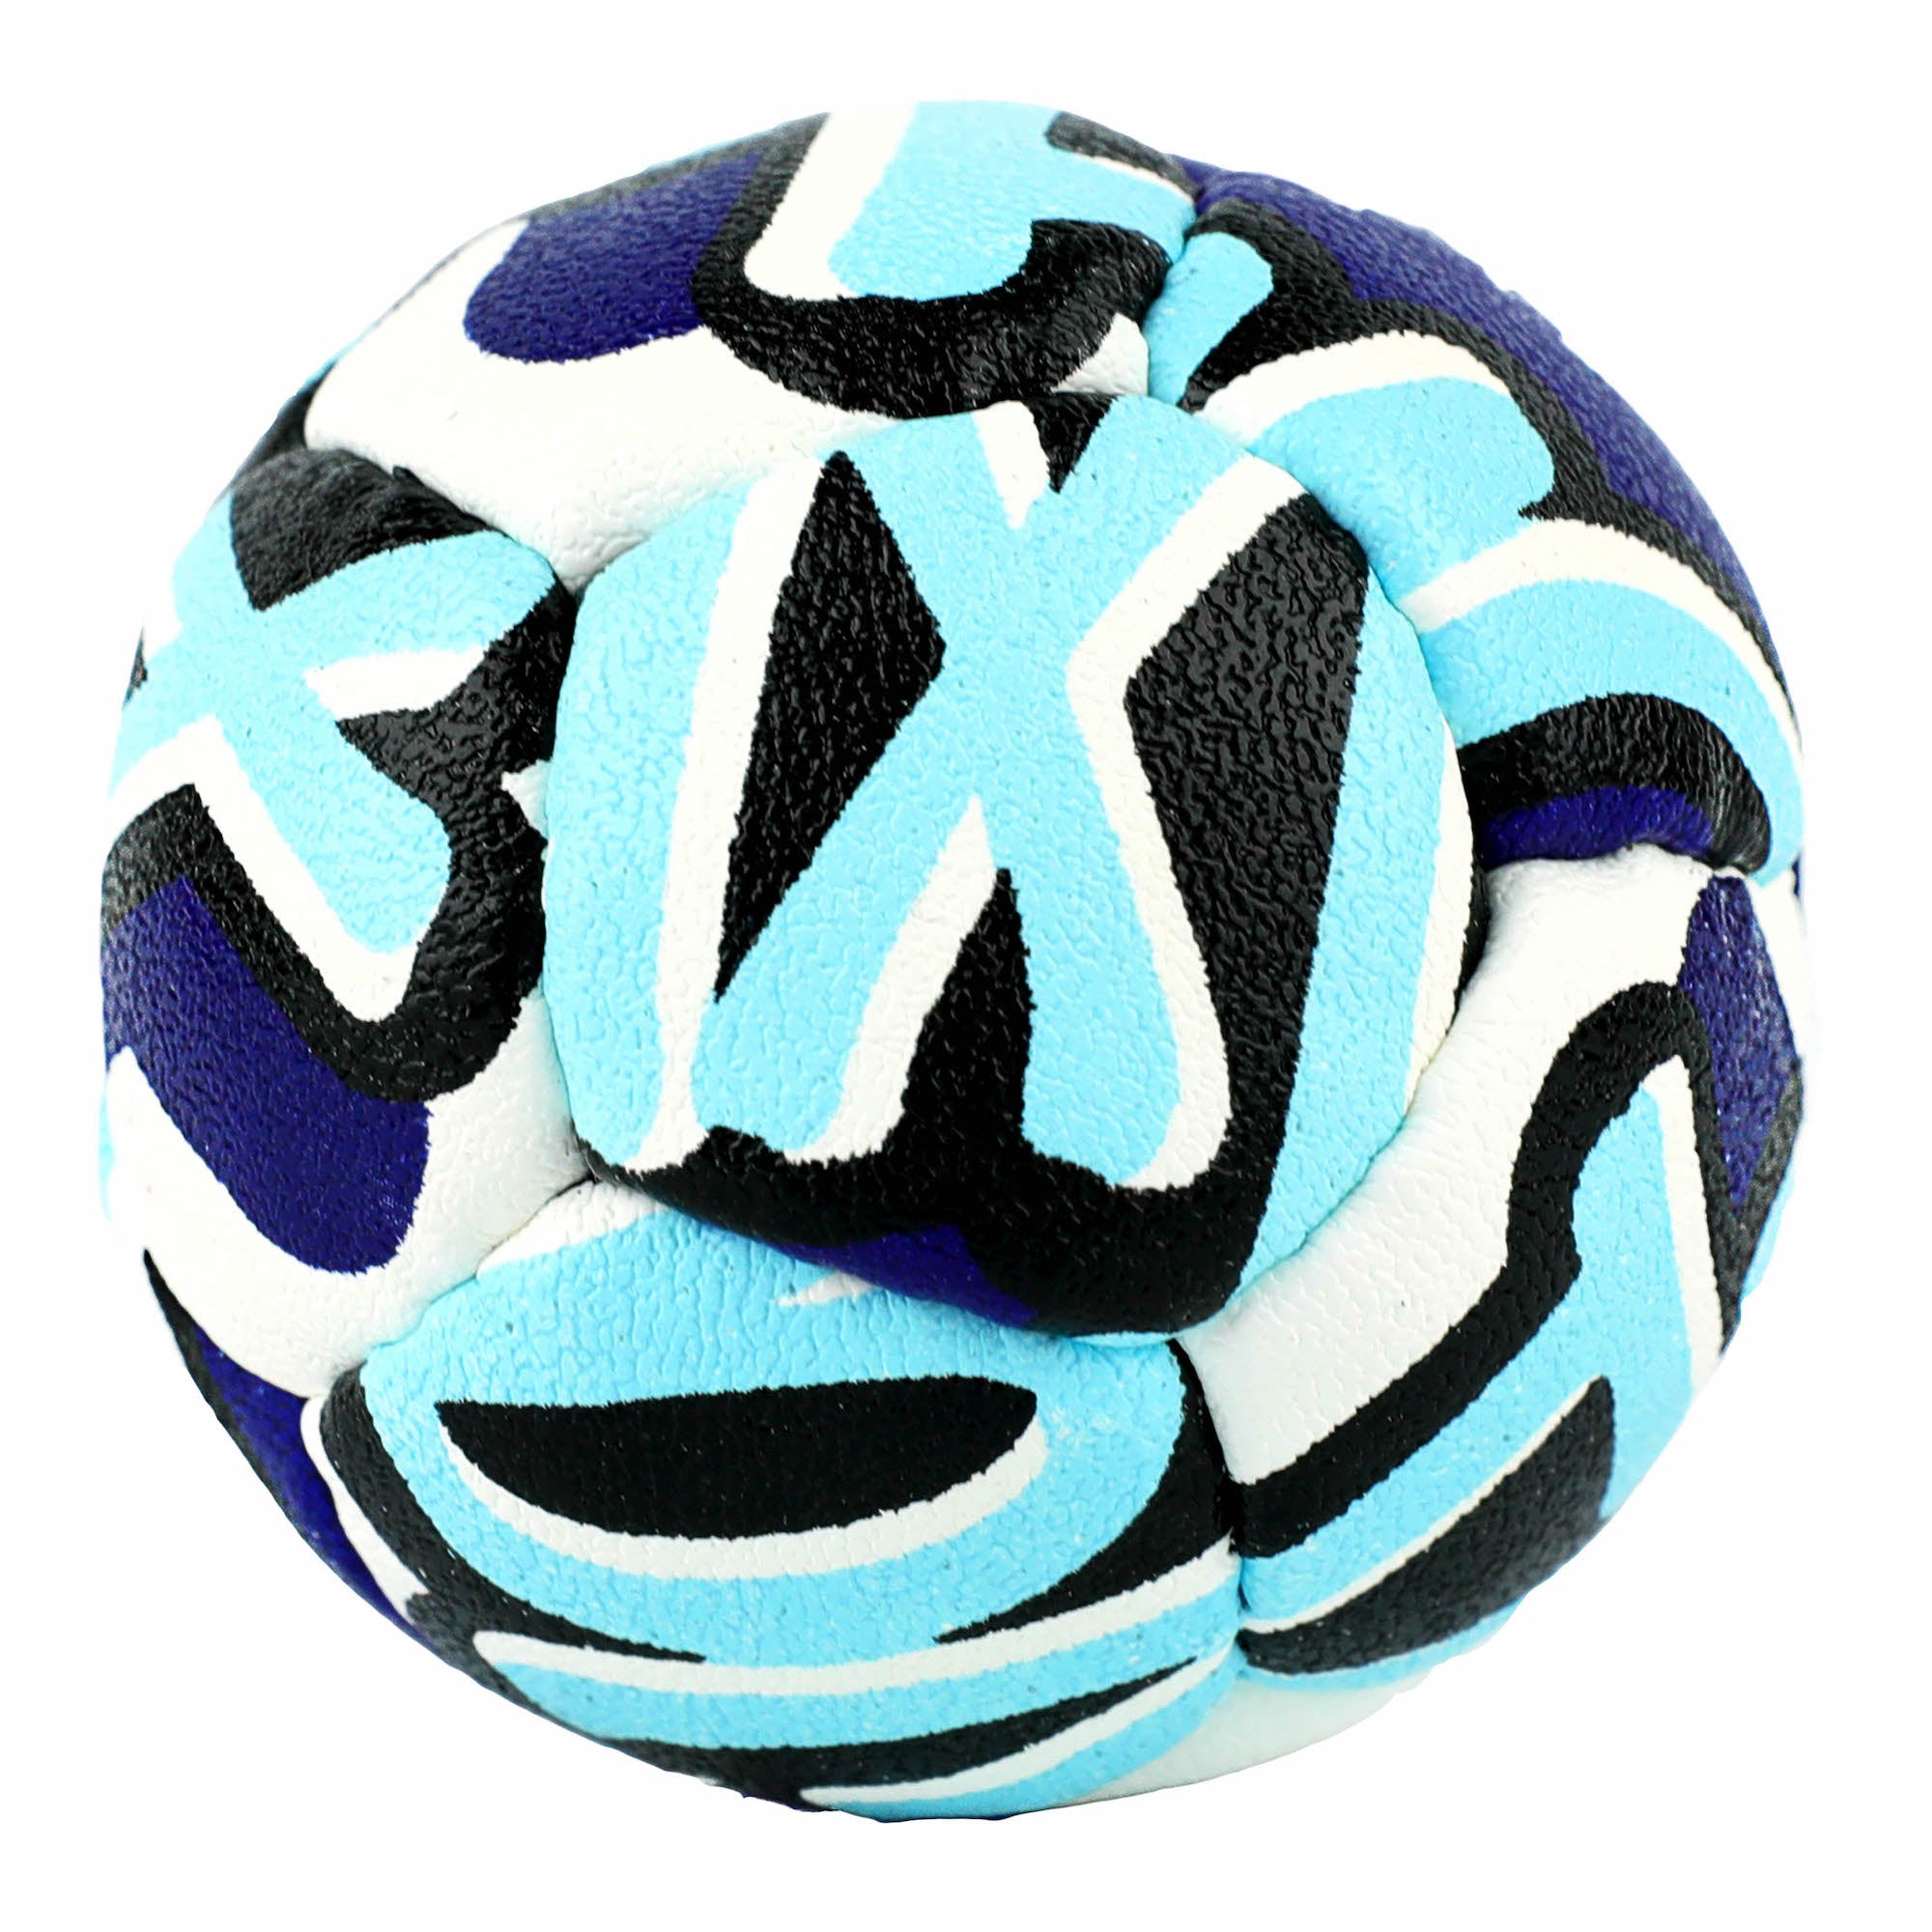 Swax Lax Swax Tag Lacrosse Training Ball - back view